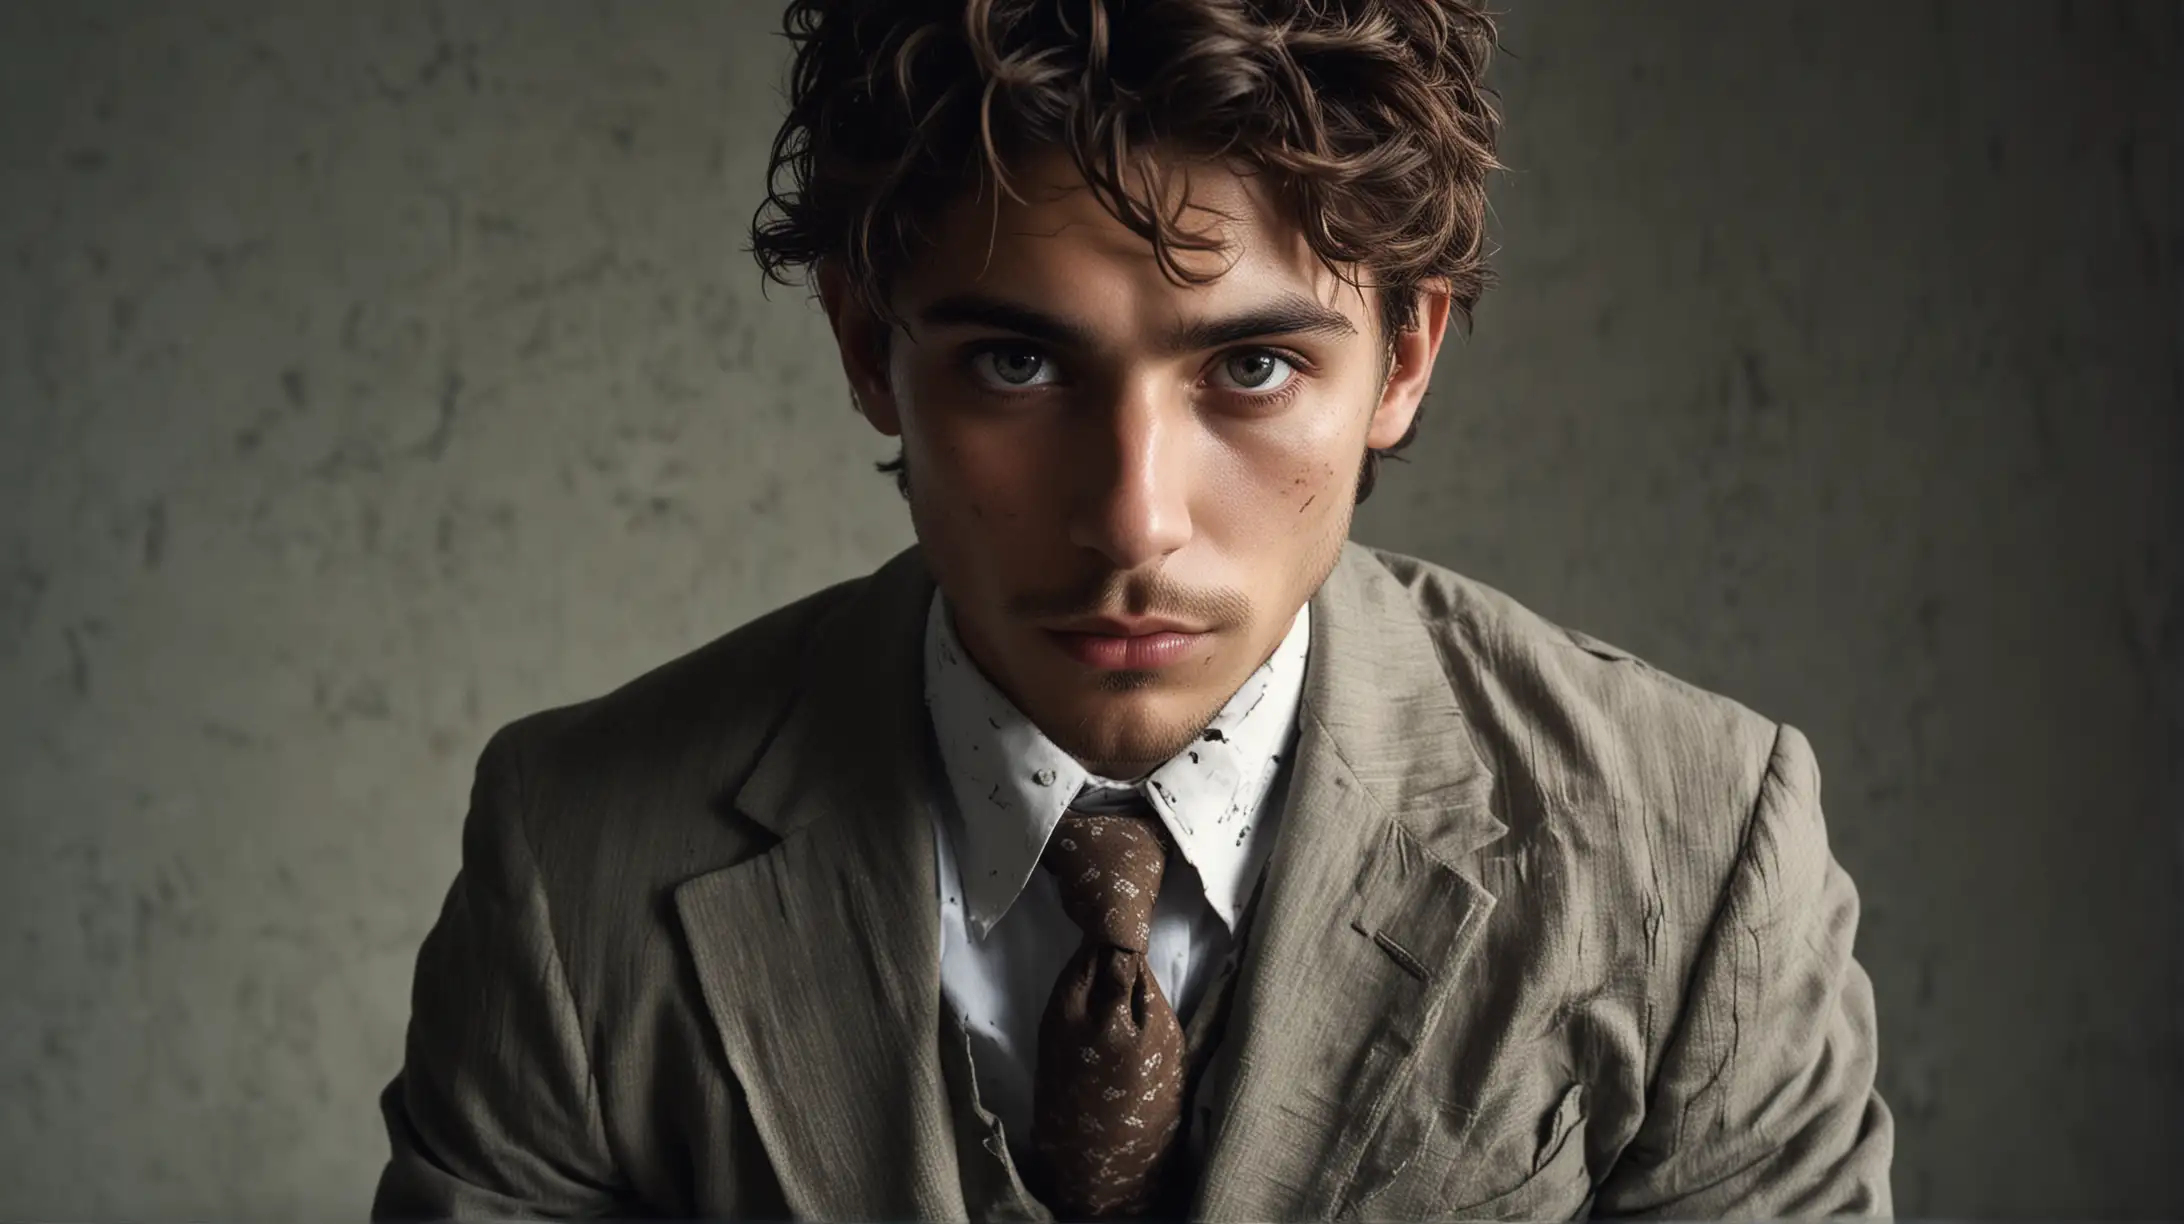 Cinematic Portrait of Shia LaBeouf in Crumpled Suit with Intense Expression